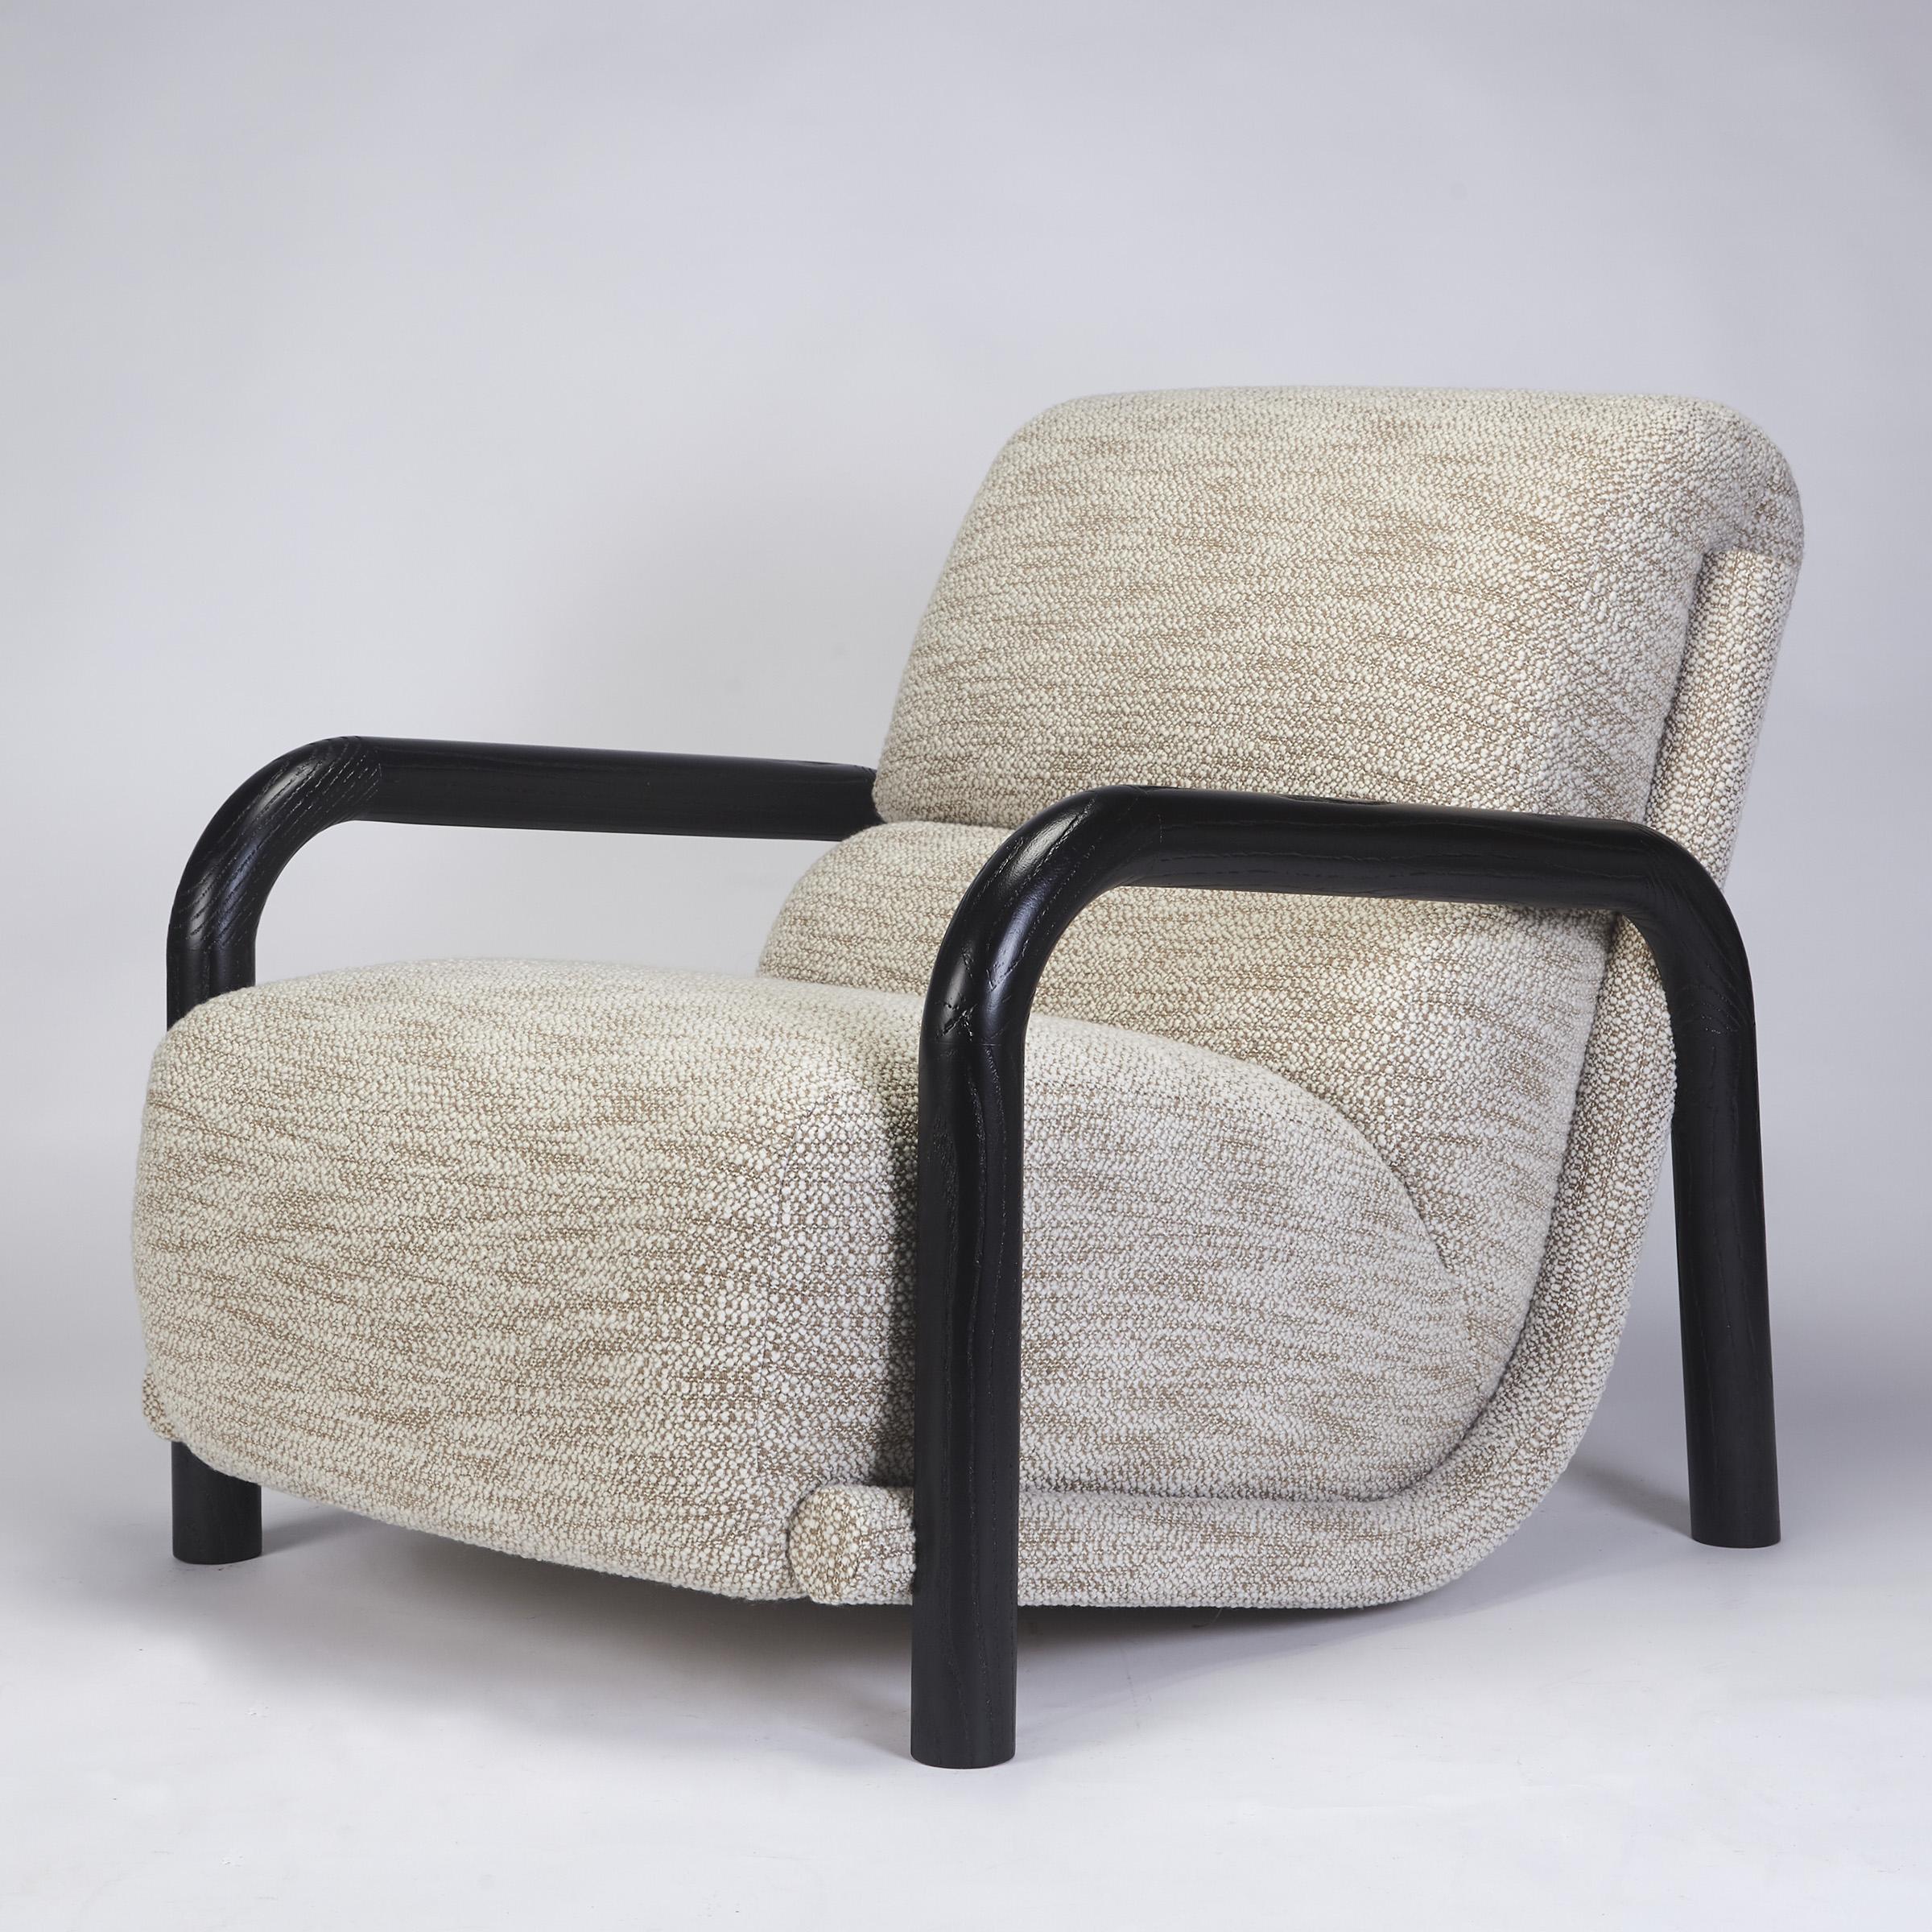 Ginga Armchair XL in Black Oak, Handcrafted in Portugal by Duistt

Ginga is the swaying movement of Brazilian martial art, Capoeira. It is characterized by a flowing movement from one side to the other, and that is what Ginga armchair conveys. A